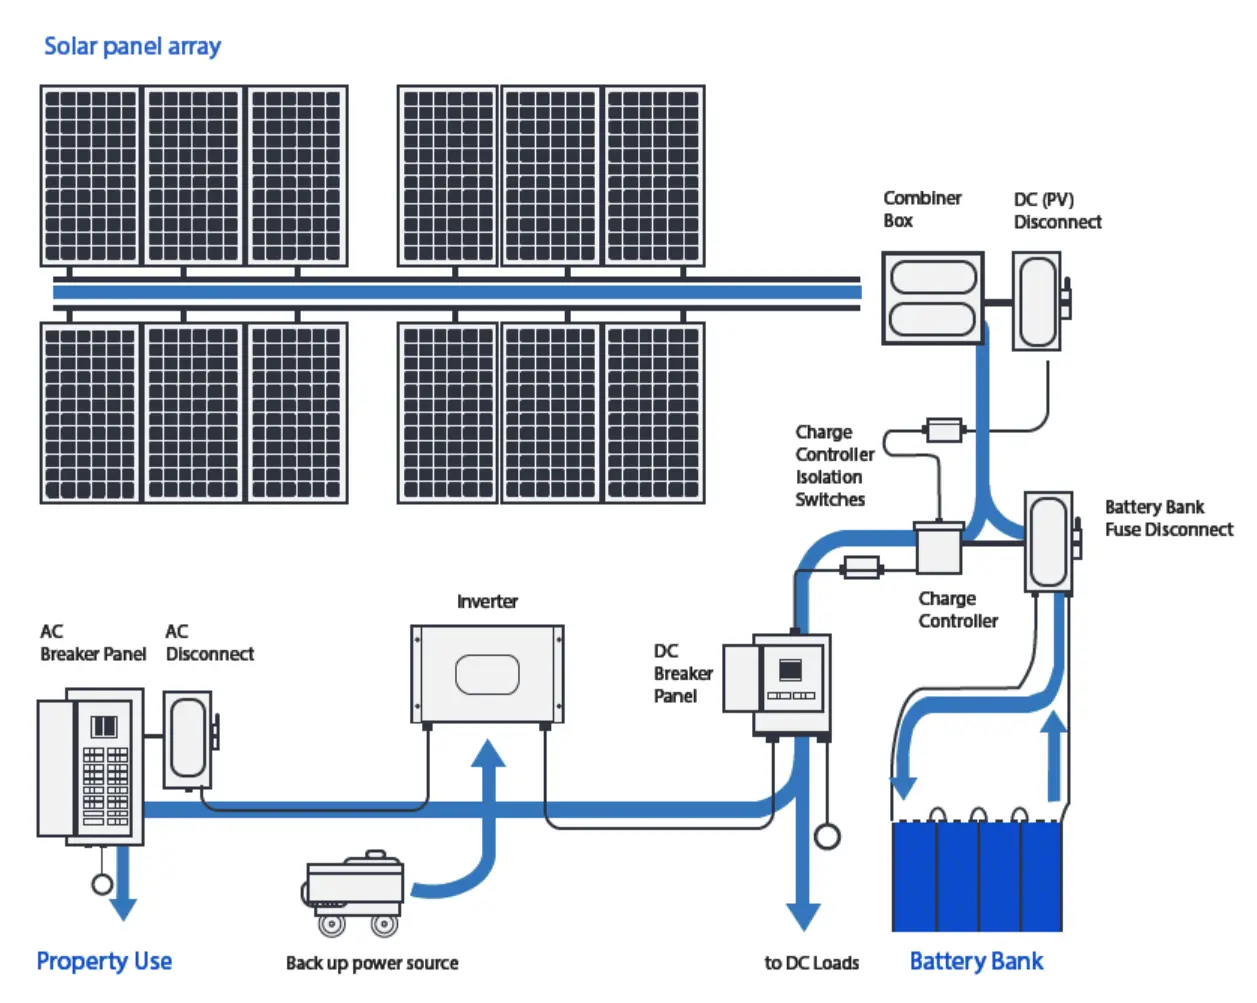 The solar power through charge controller to battery bank and inverter output solar power to your home load